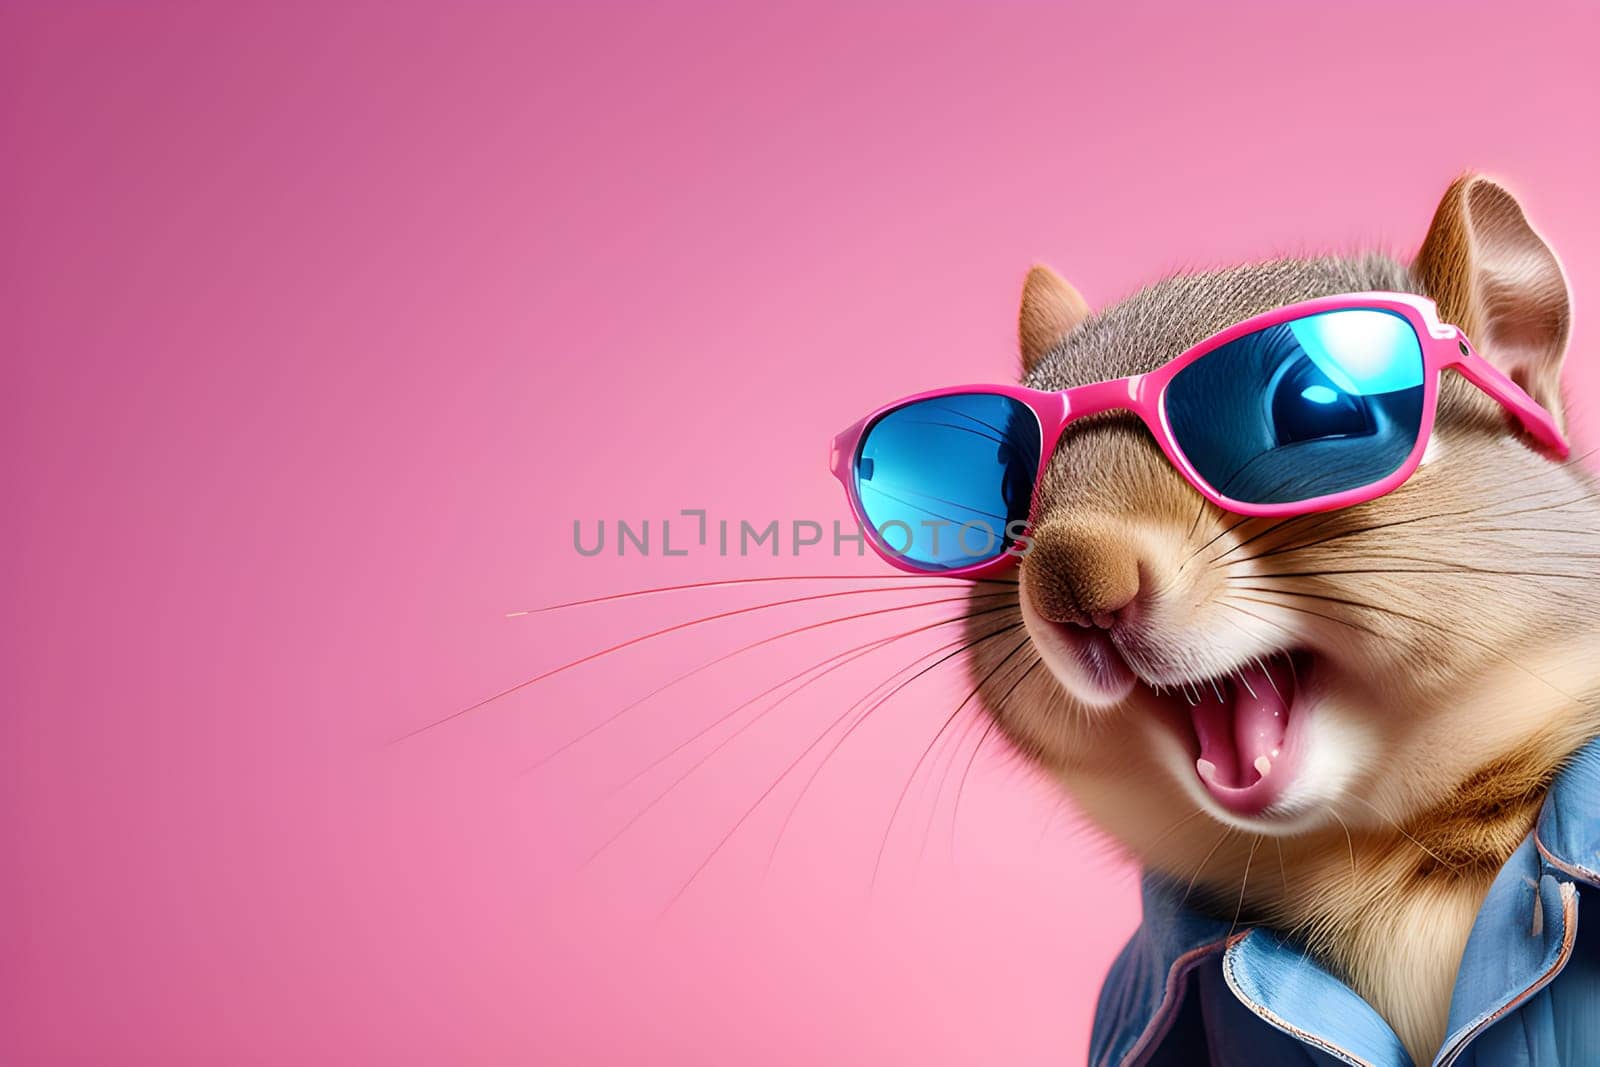 Squirrel man, kangaroo in a denim jacket and pink shirt with pink glasses on a pink background by Ekaterina34